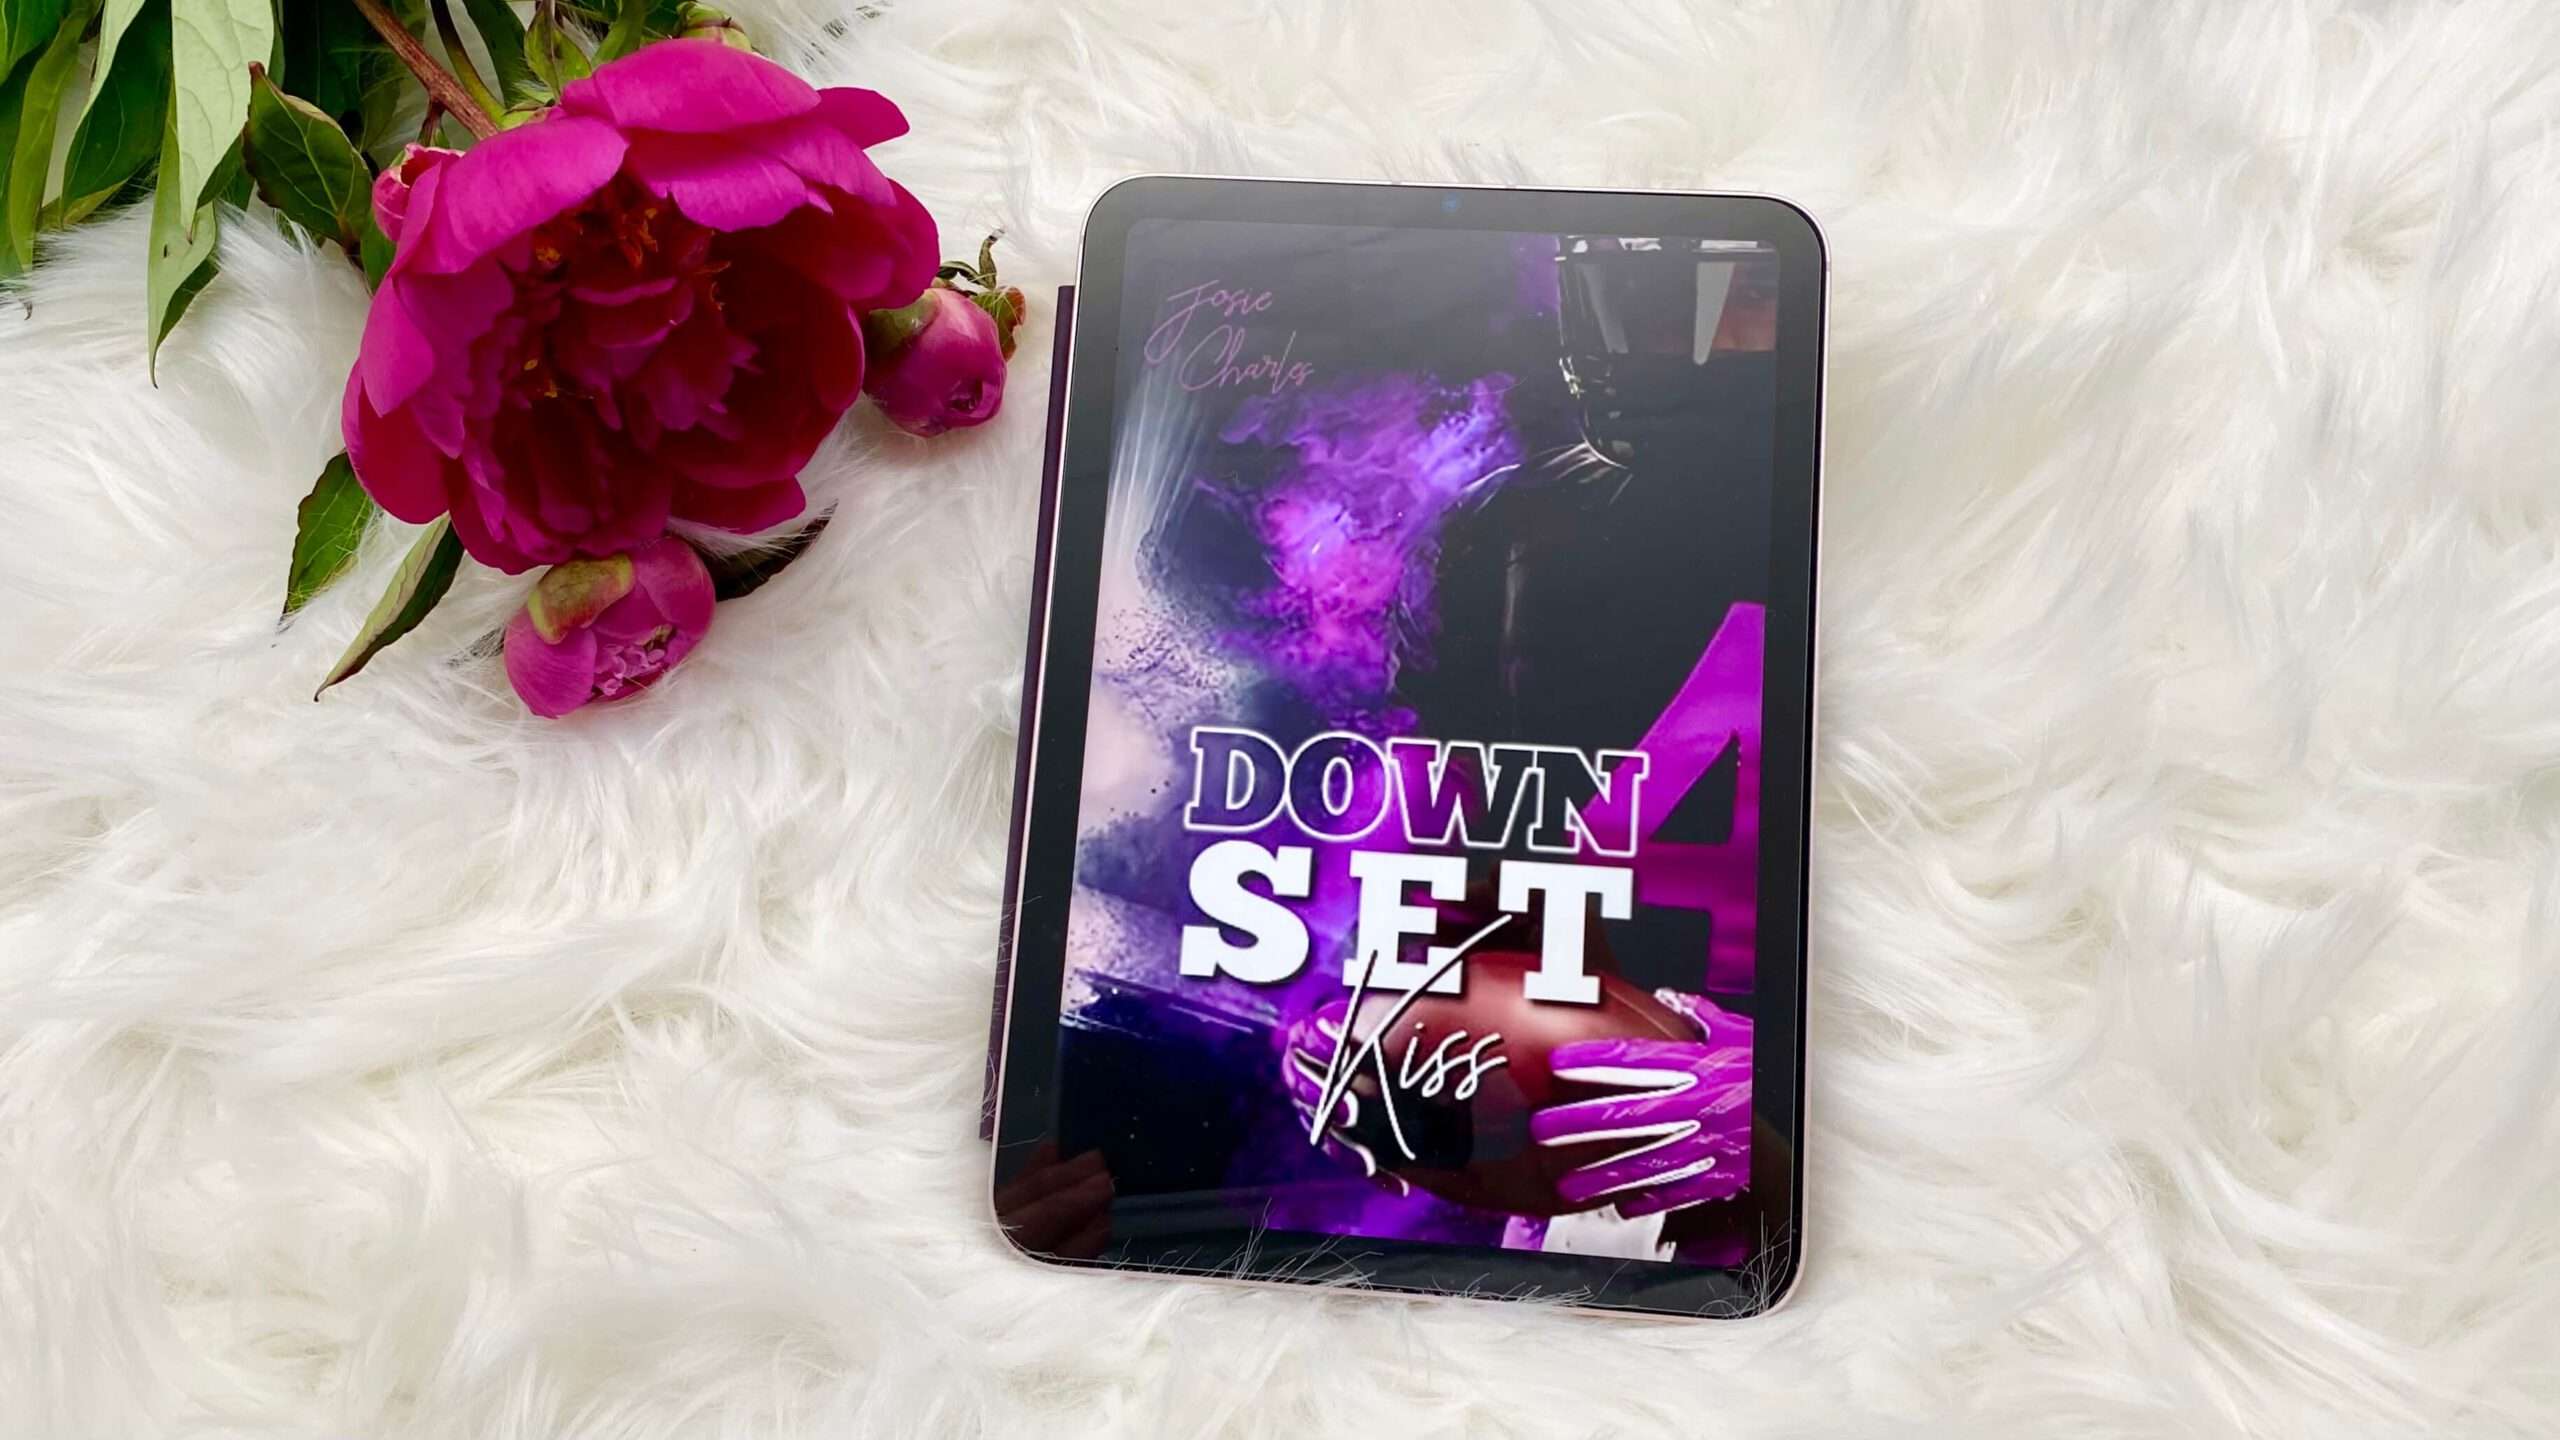 Read more about the article „DOWN, SET, KISS“ von Josie Charles